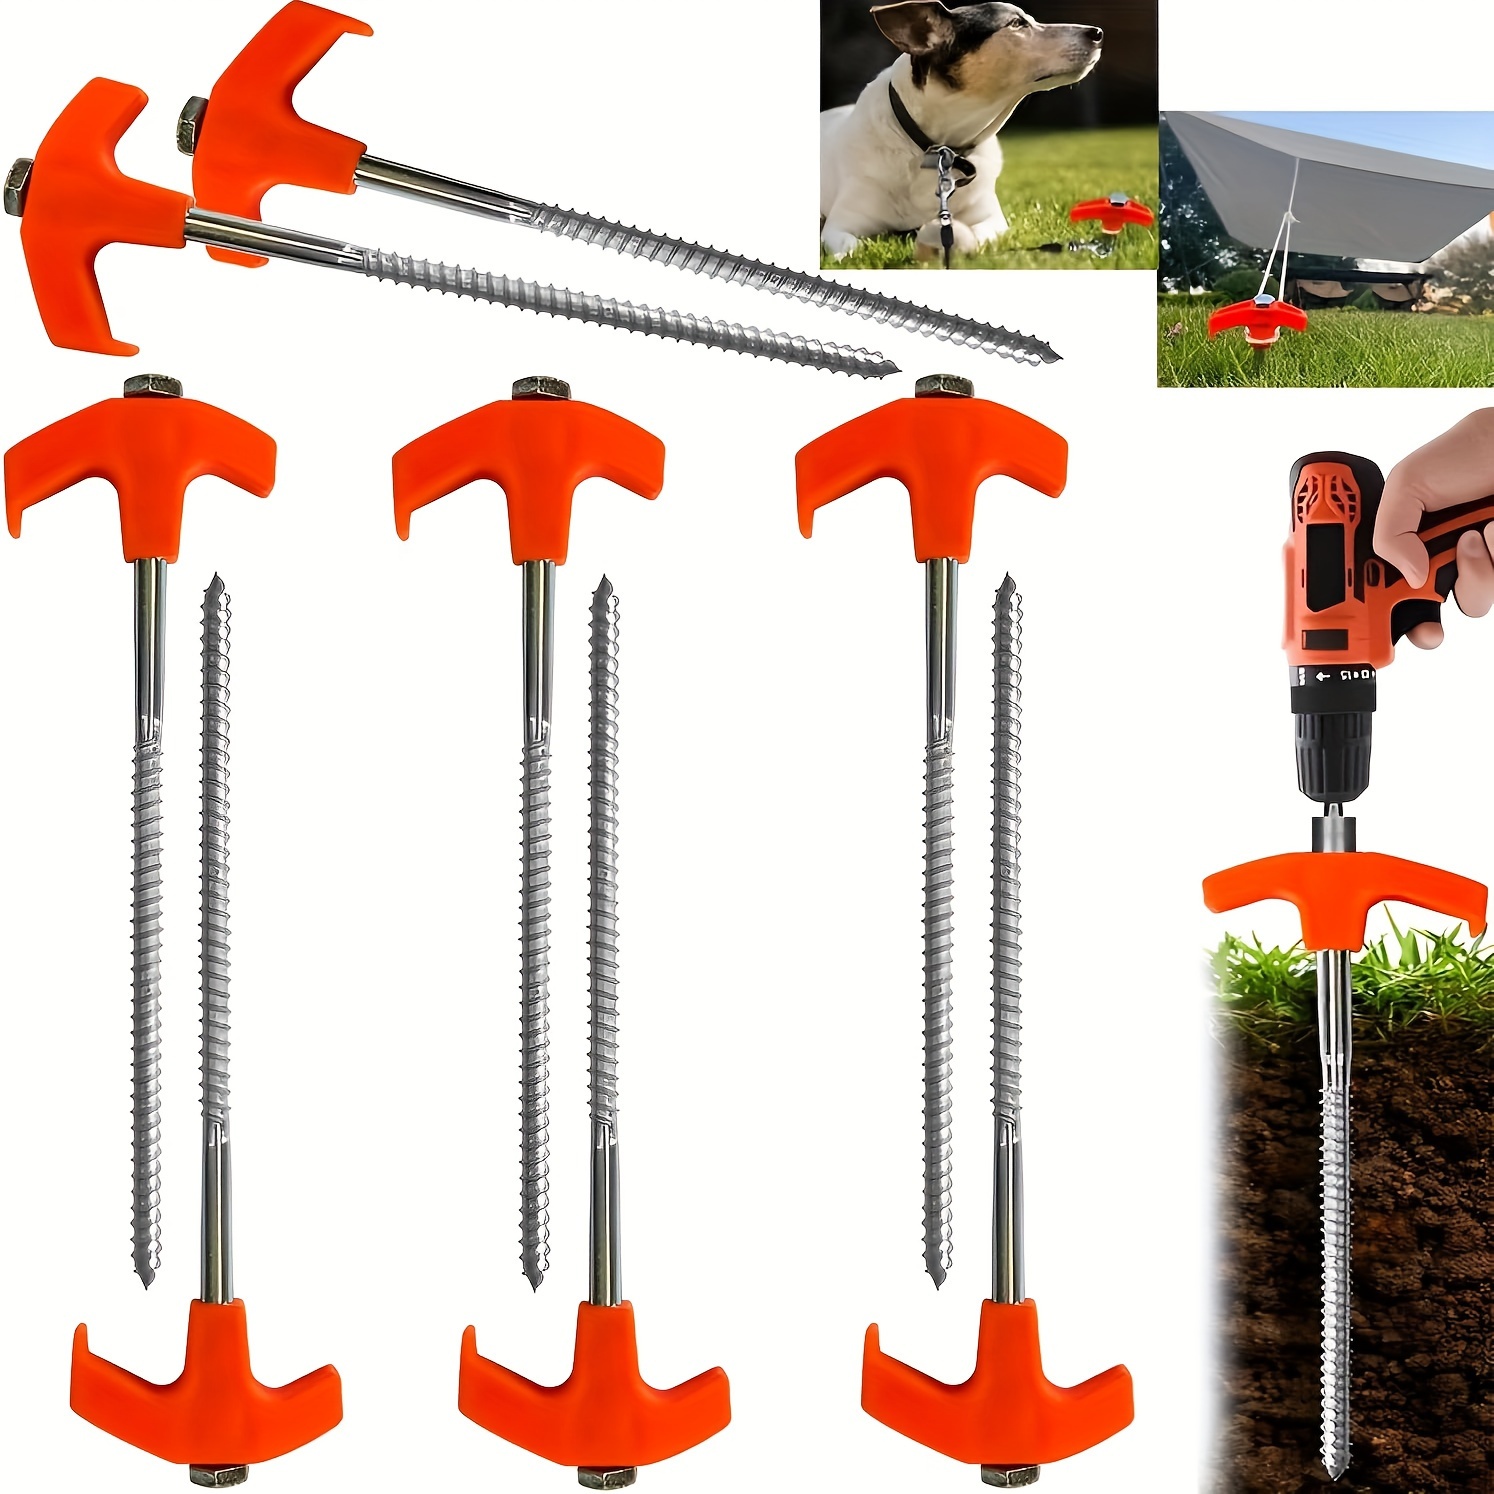 

8pcs 8-inch Tungsten Steel Tent Stakes - Heavy-duty Drillable Ground Anchors With Hexagonal Head Design, Durable Studs For Camping, Canopies, Gardens & , Glow-in-the-dark Features